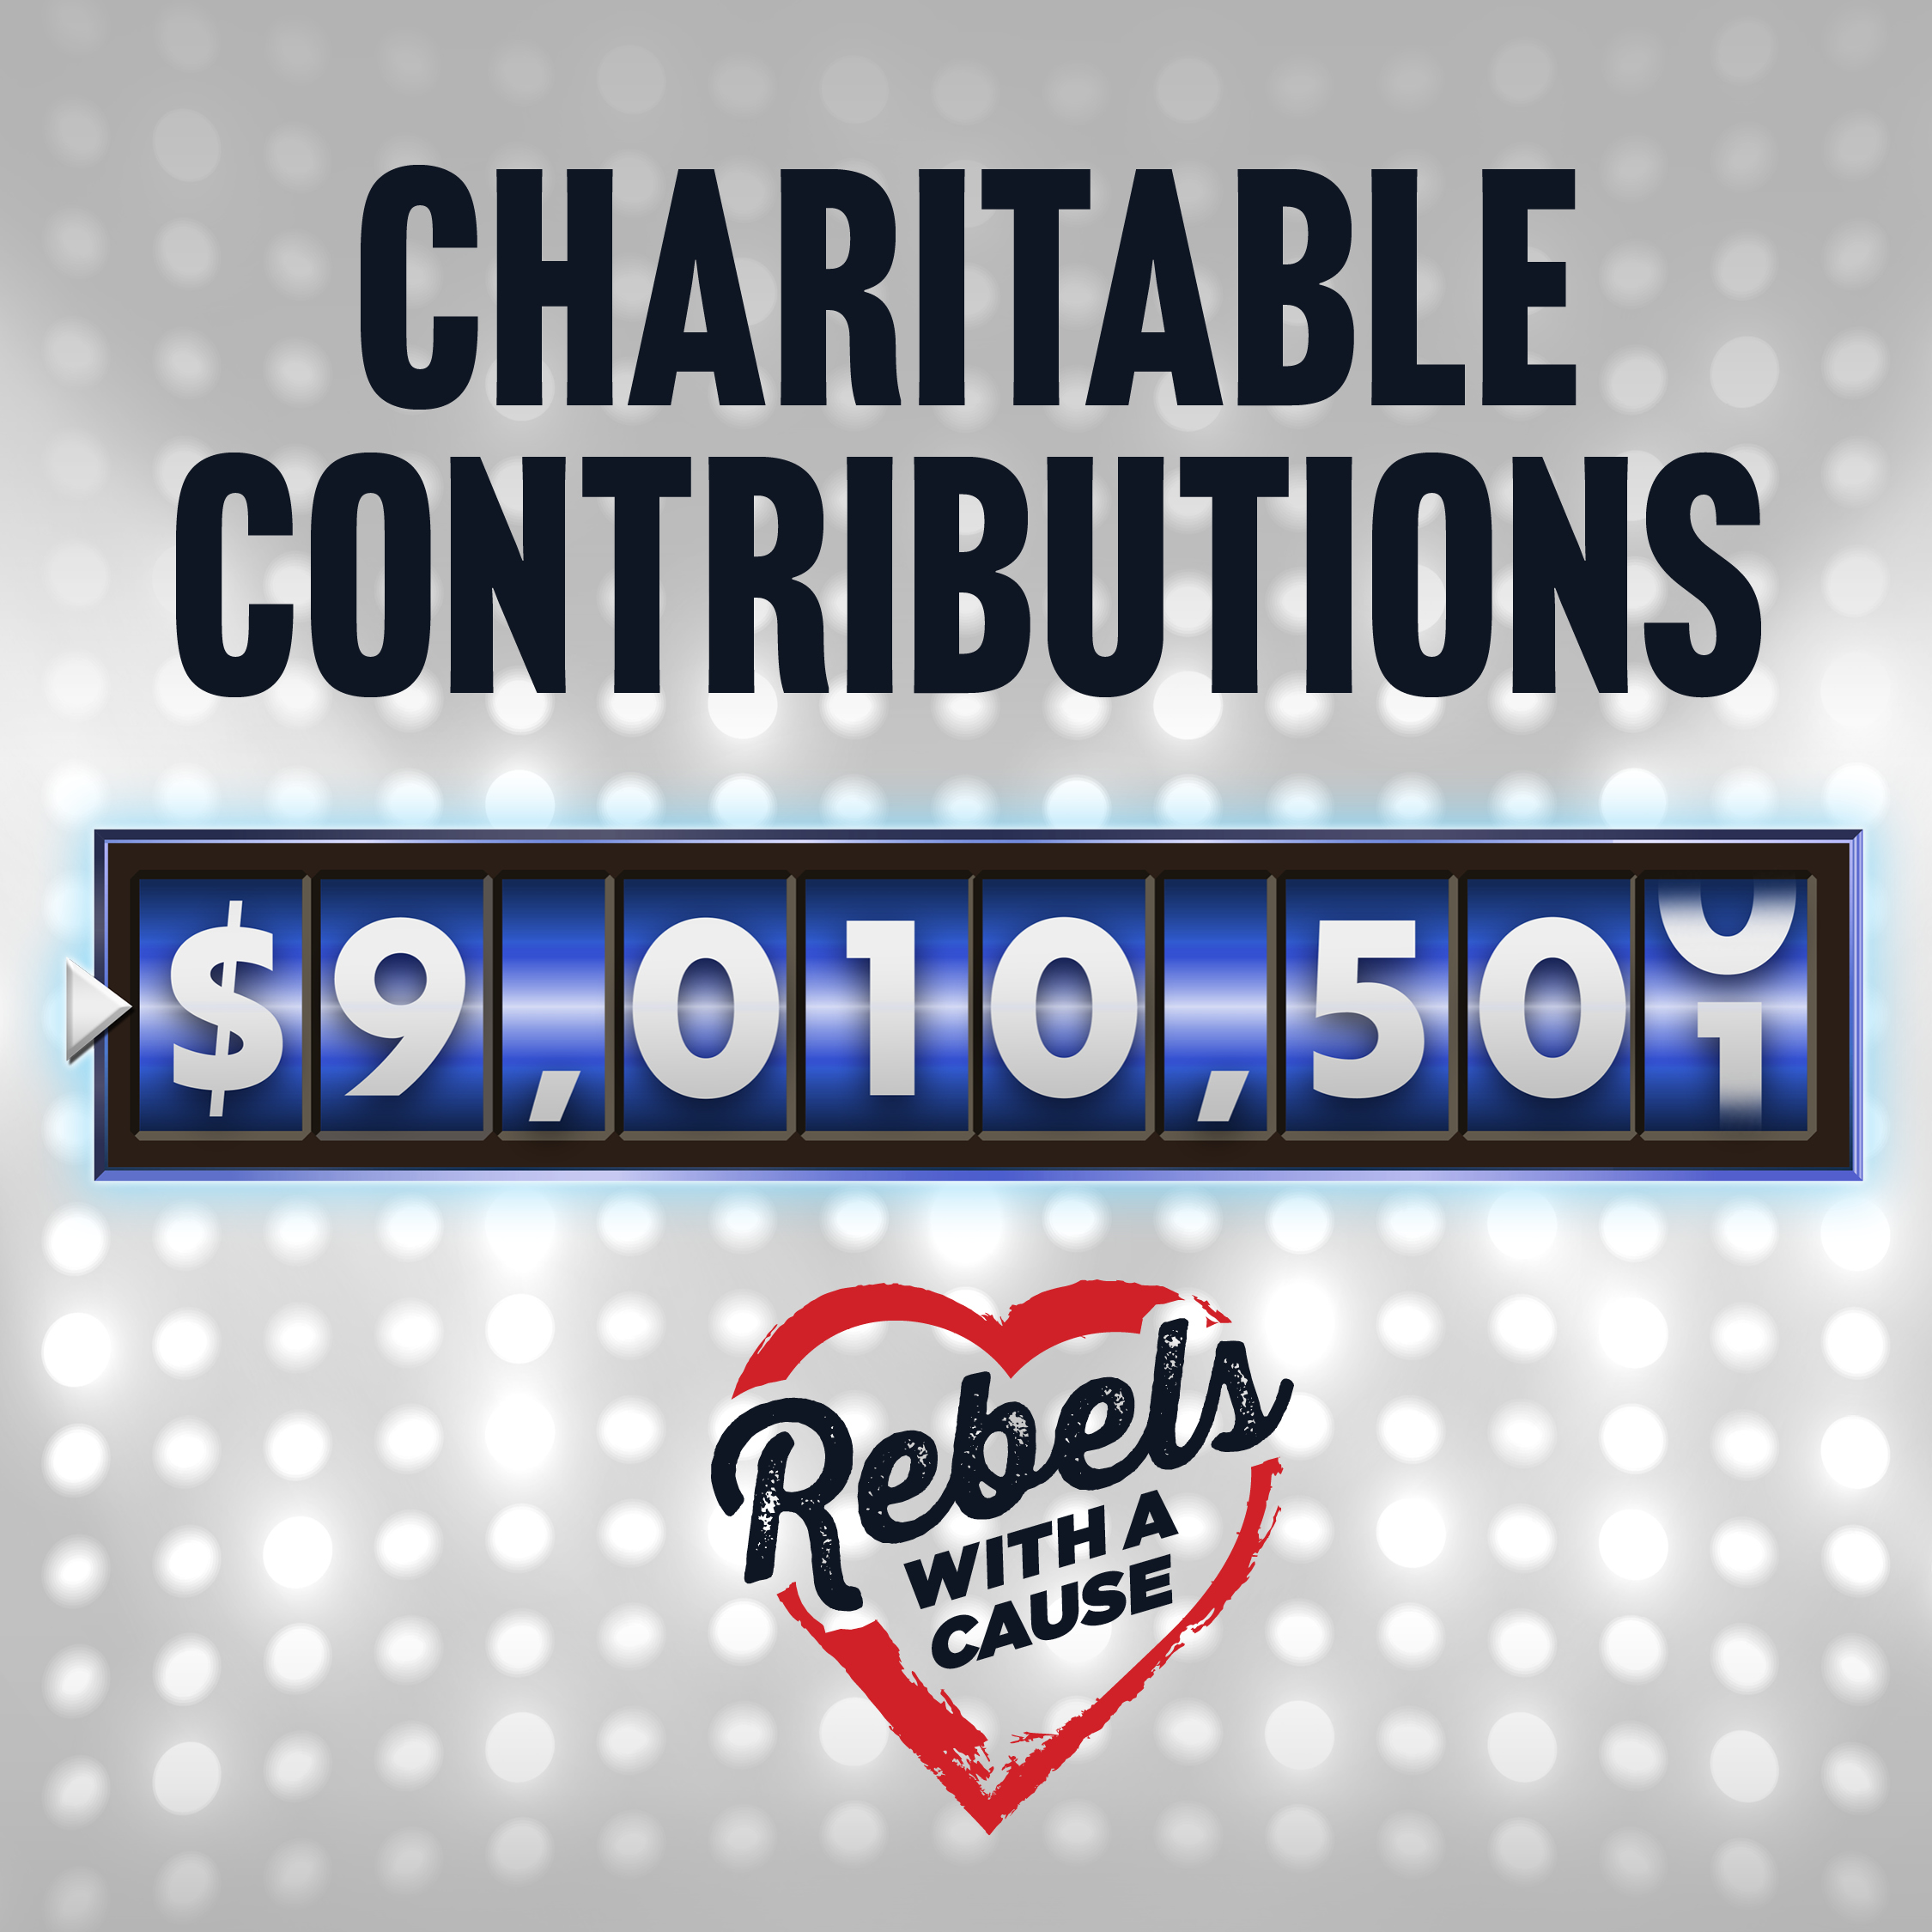 Charitable Contributions $9,010,500